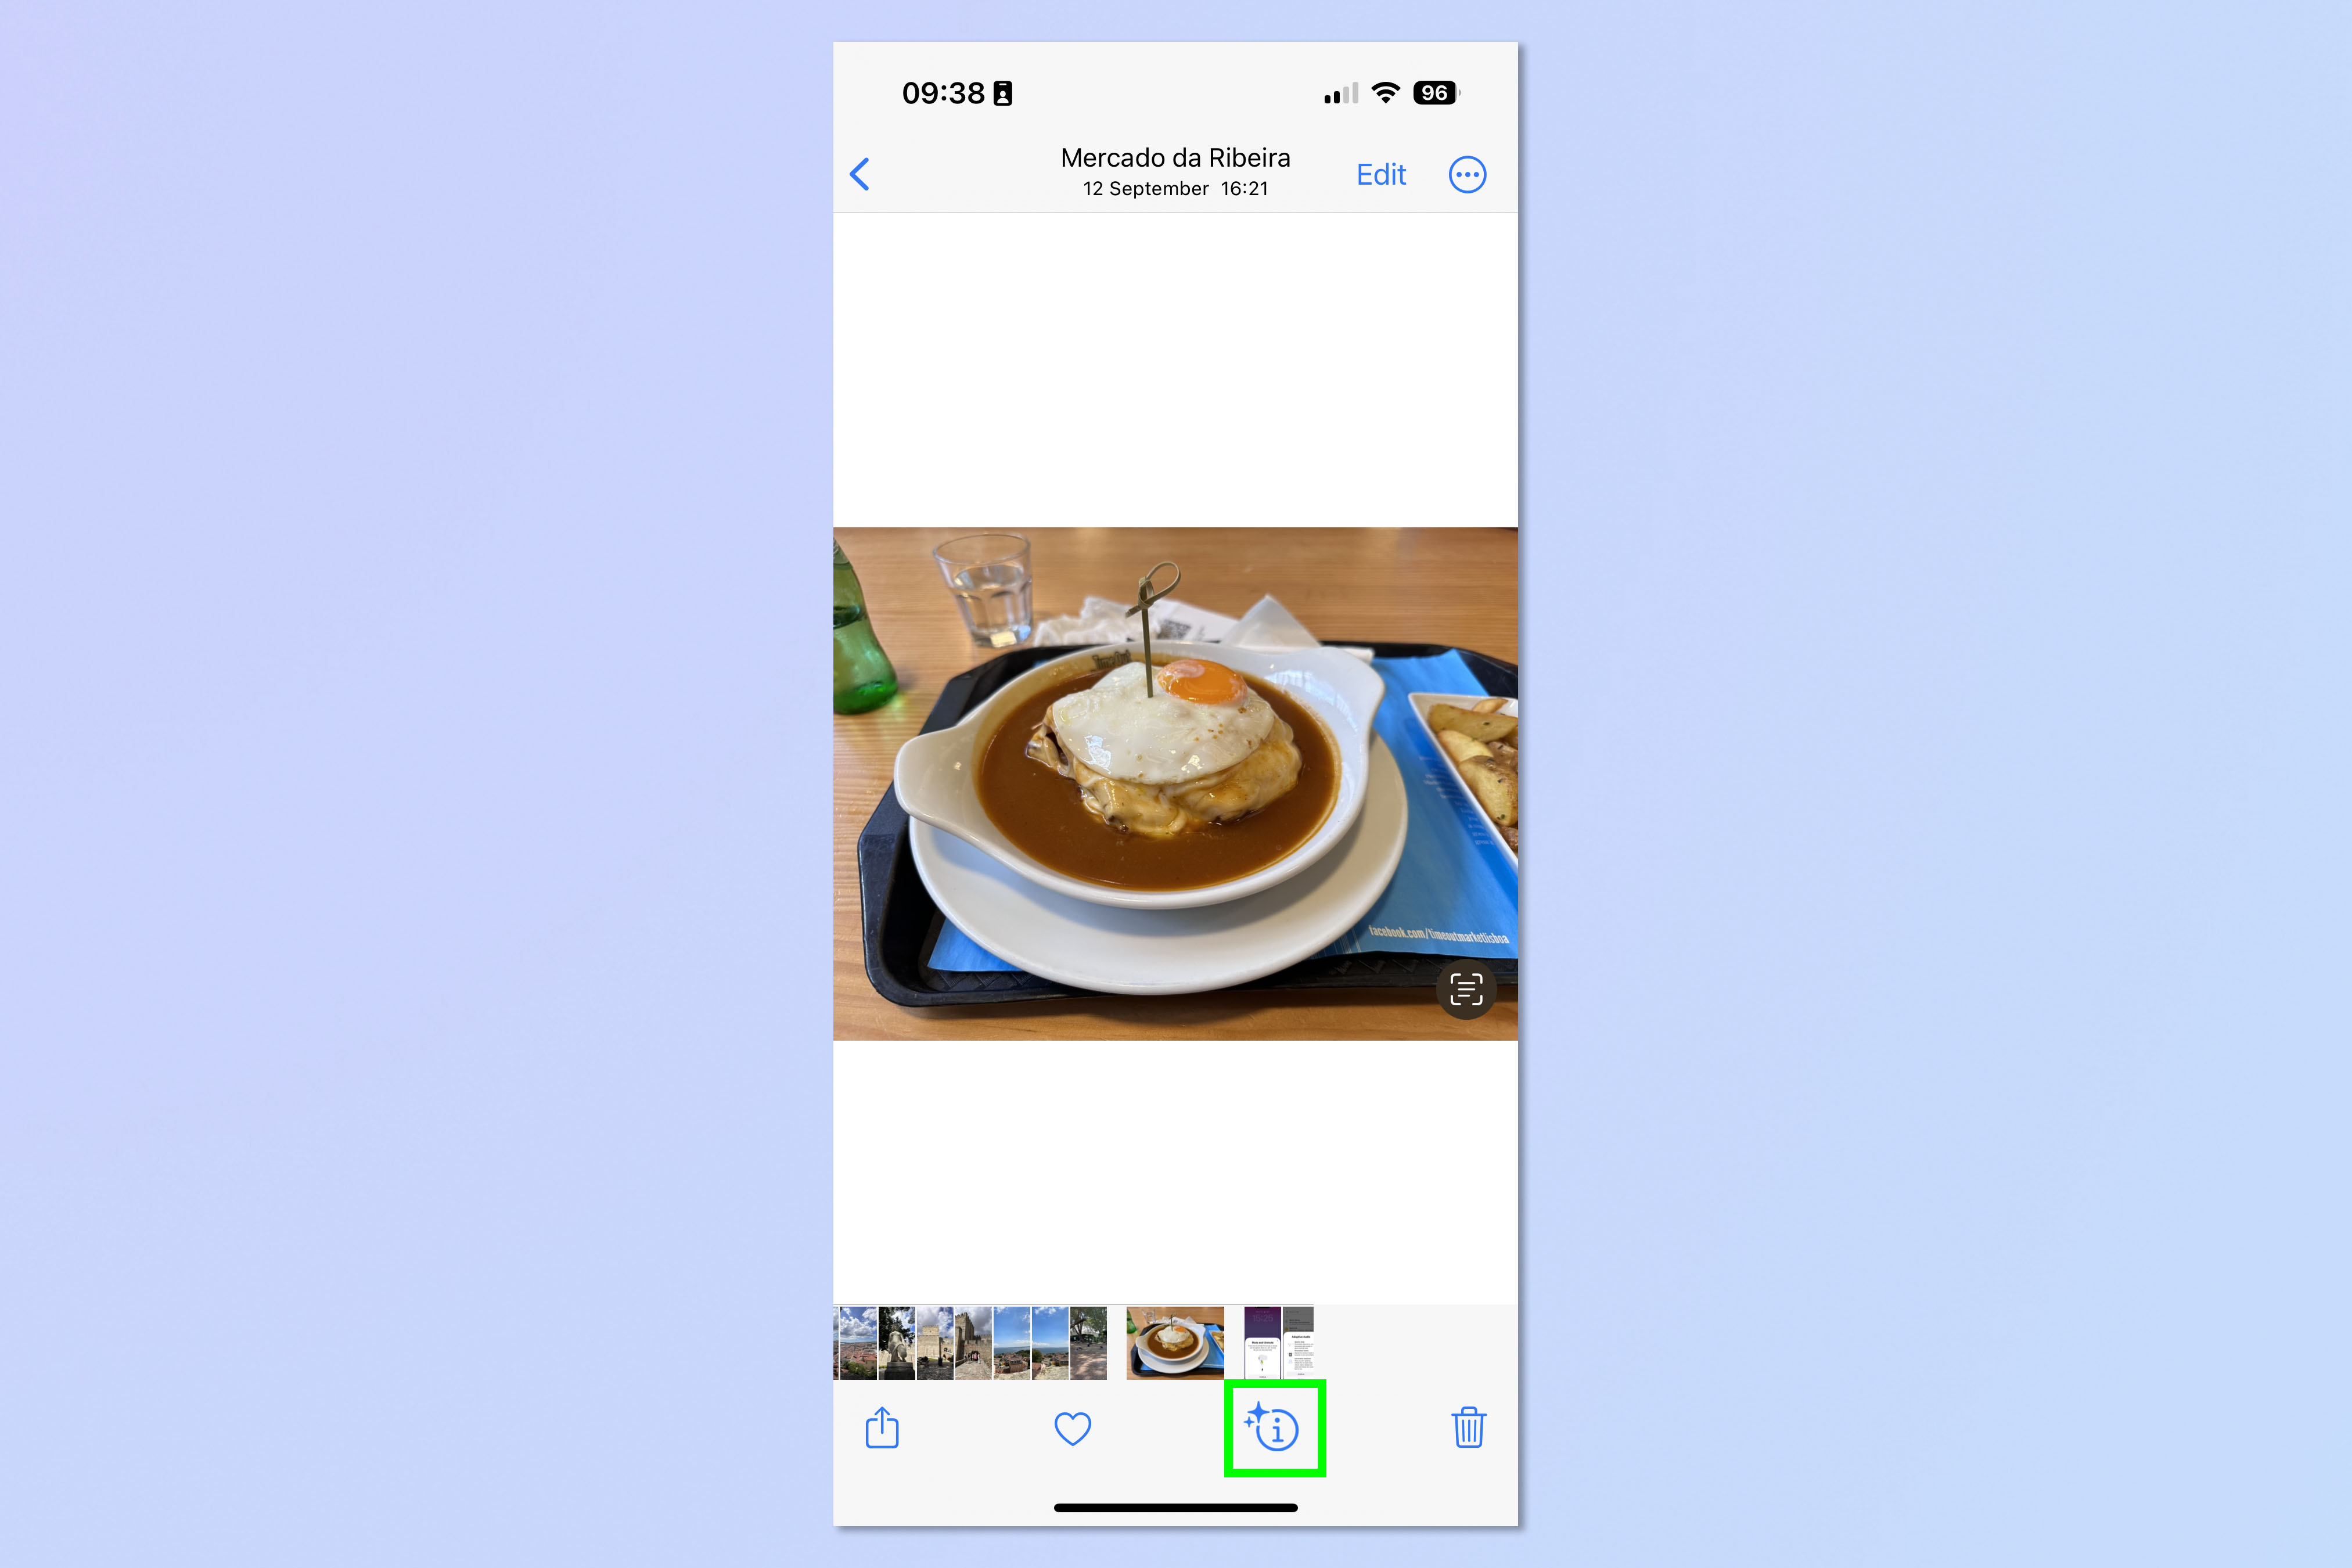 Screenshot showing how to identify food using visual search on iPhone